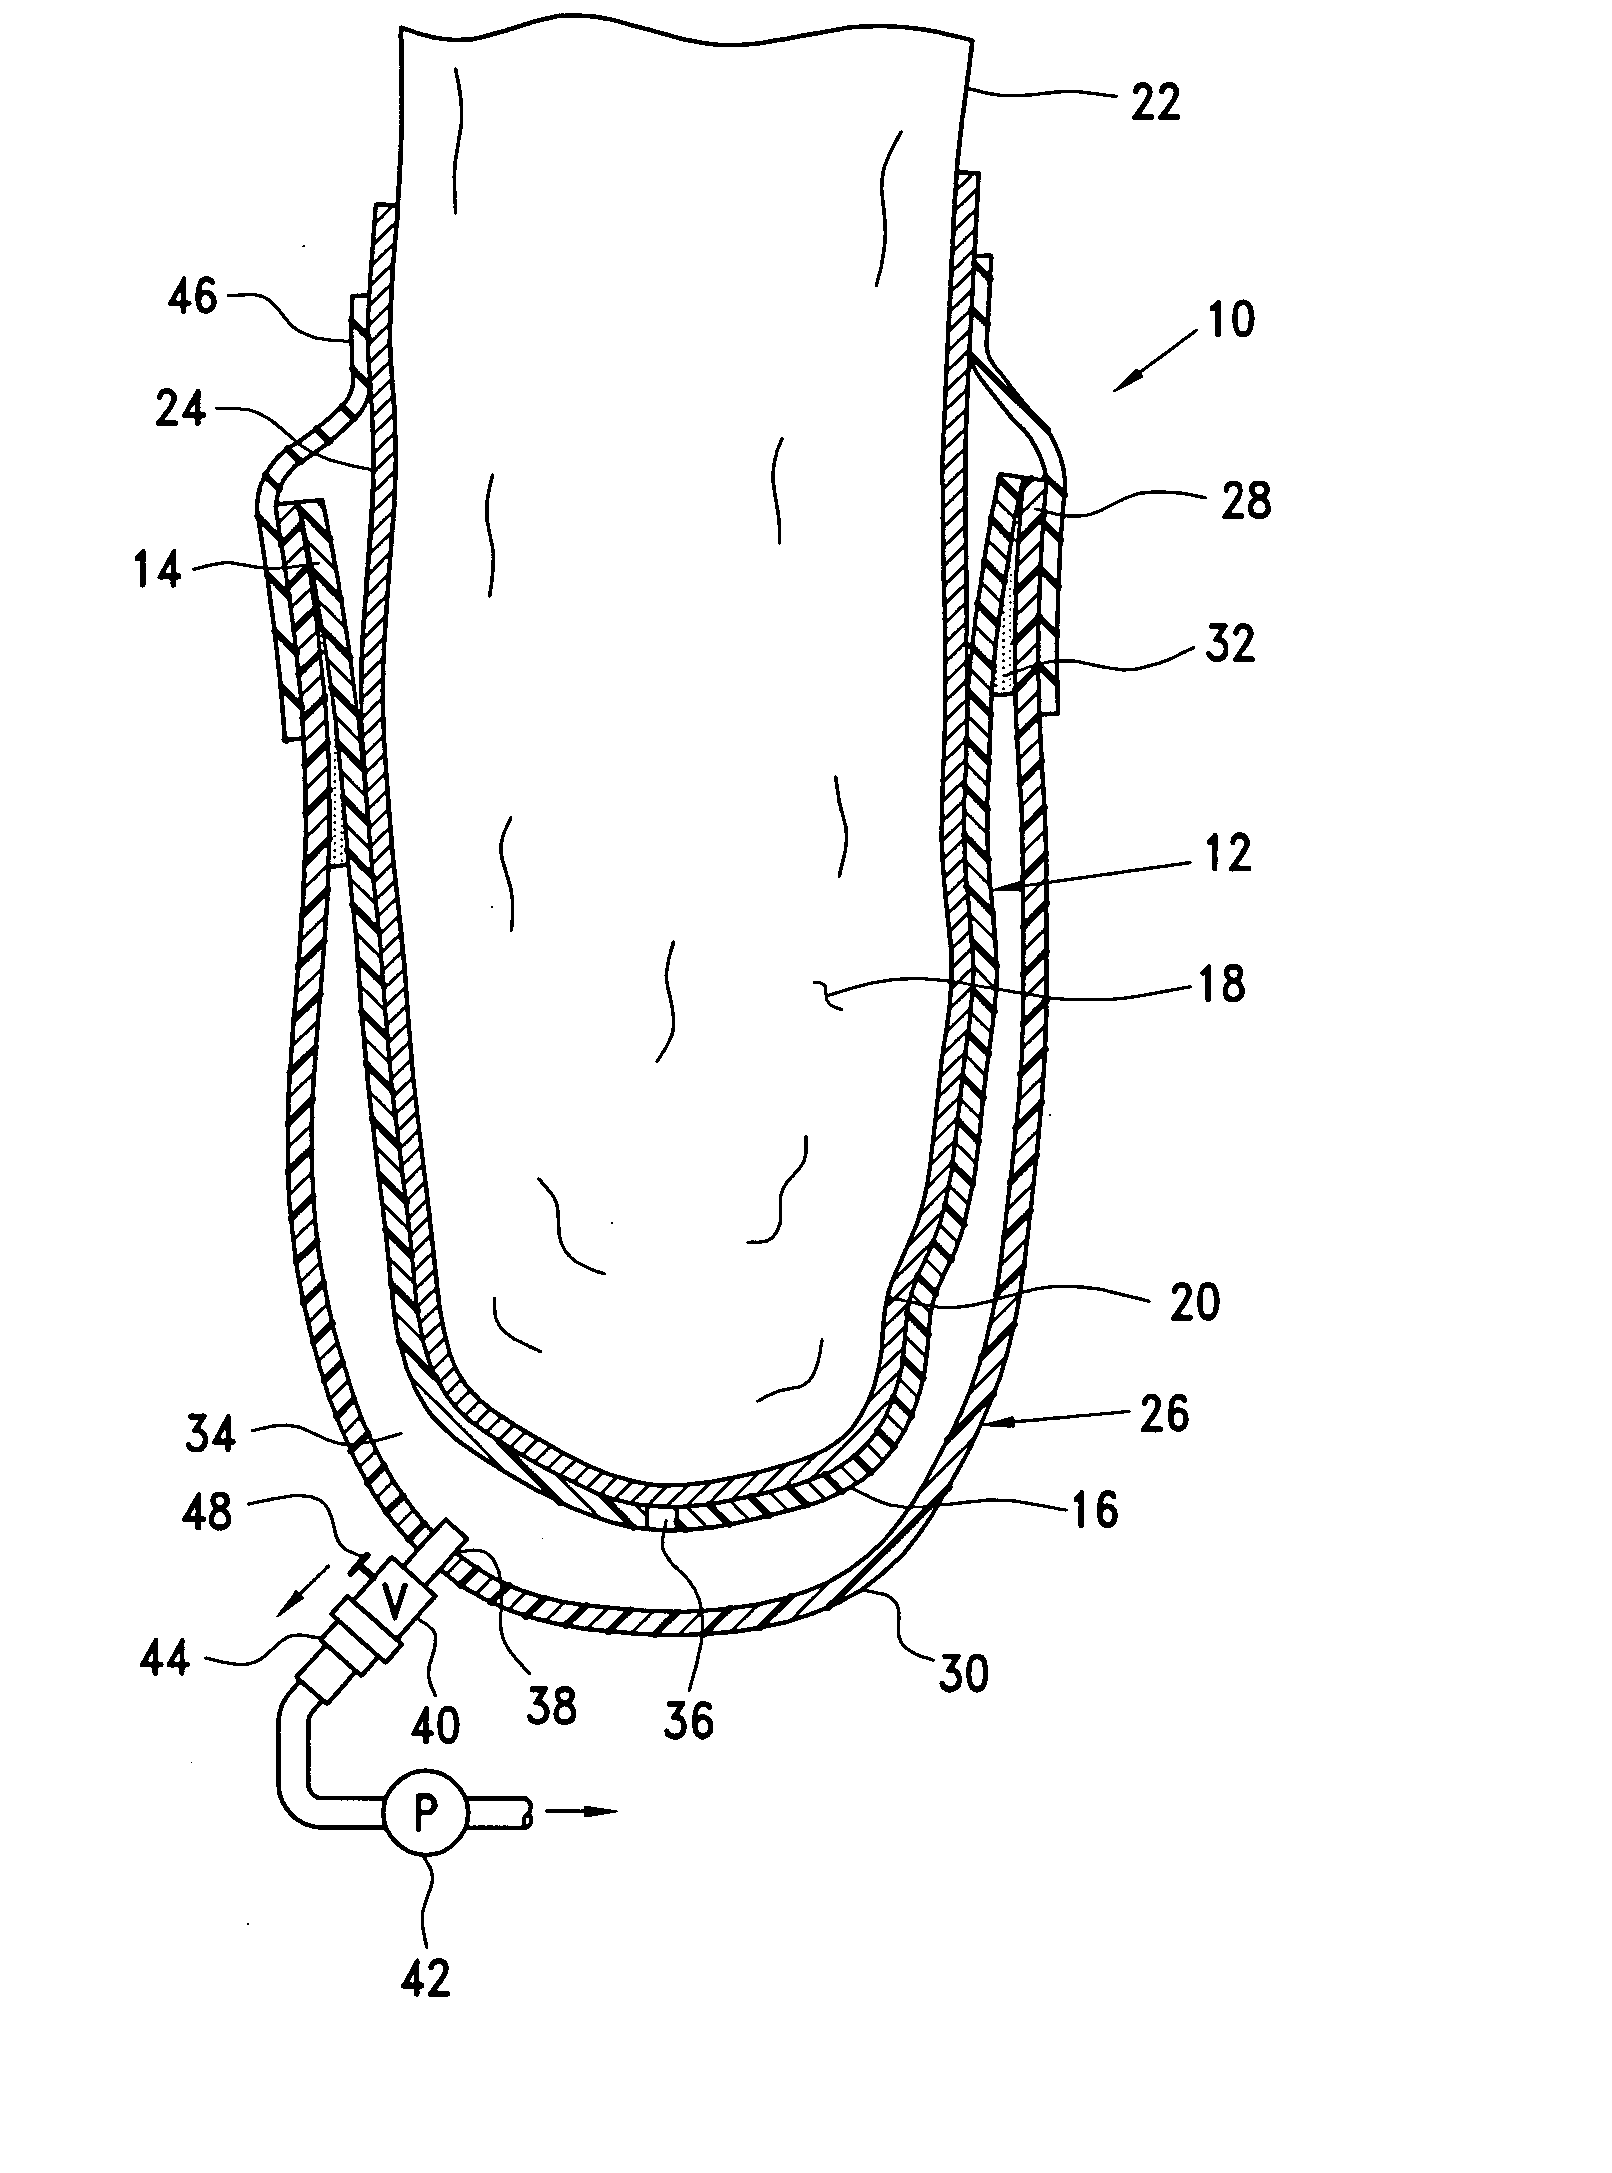 Prosthetic socket with self-contained vacuum reservoir